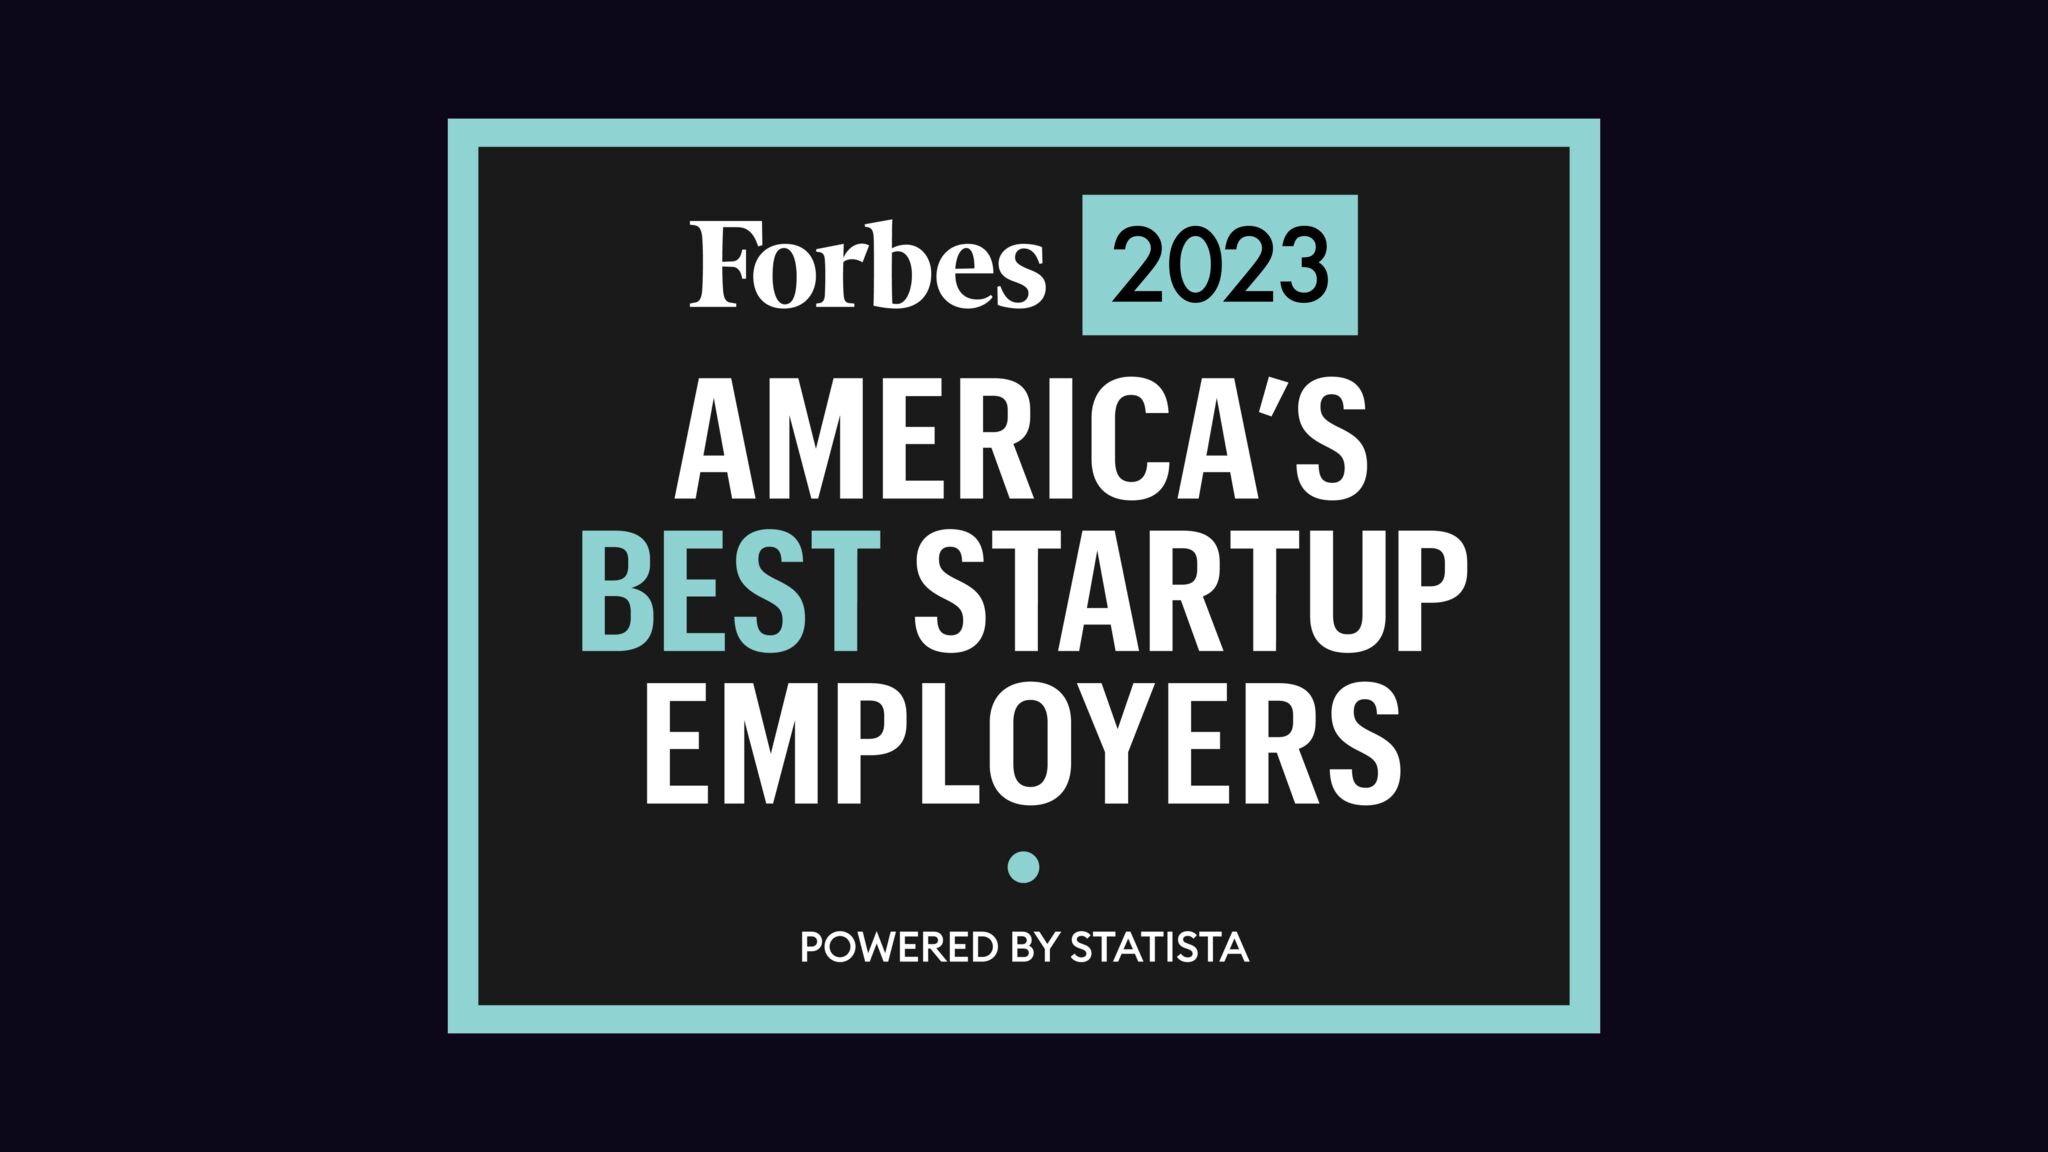 Gatik recognized on Forbes’ list of Best Startup Employers in America